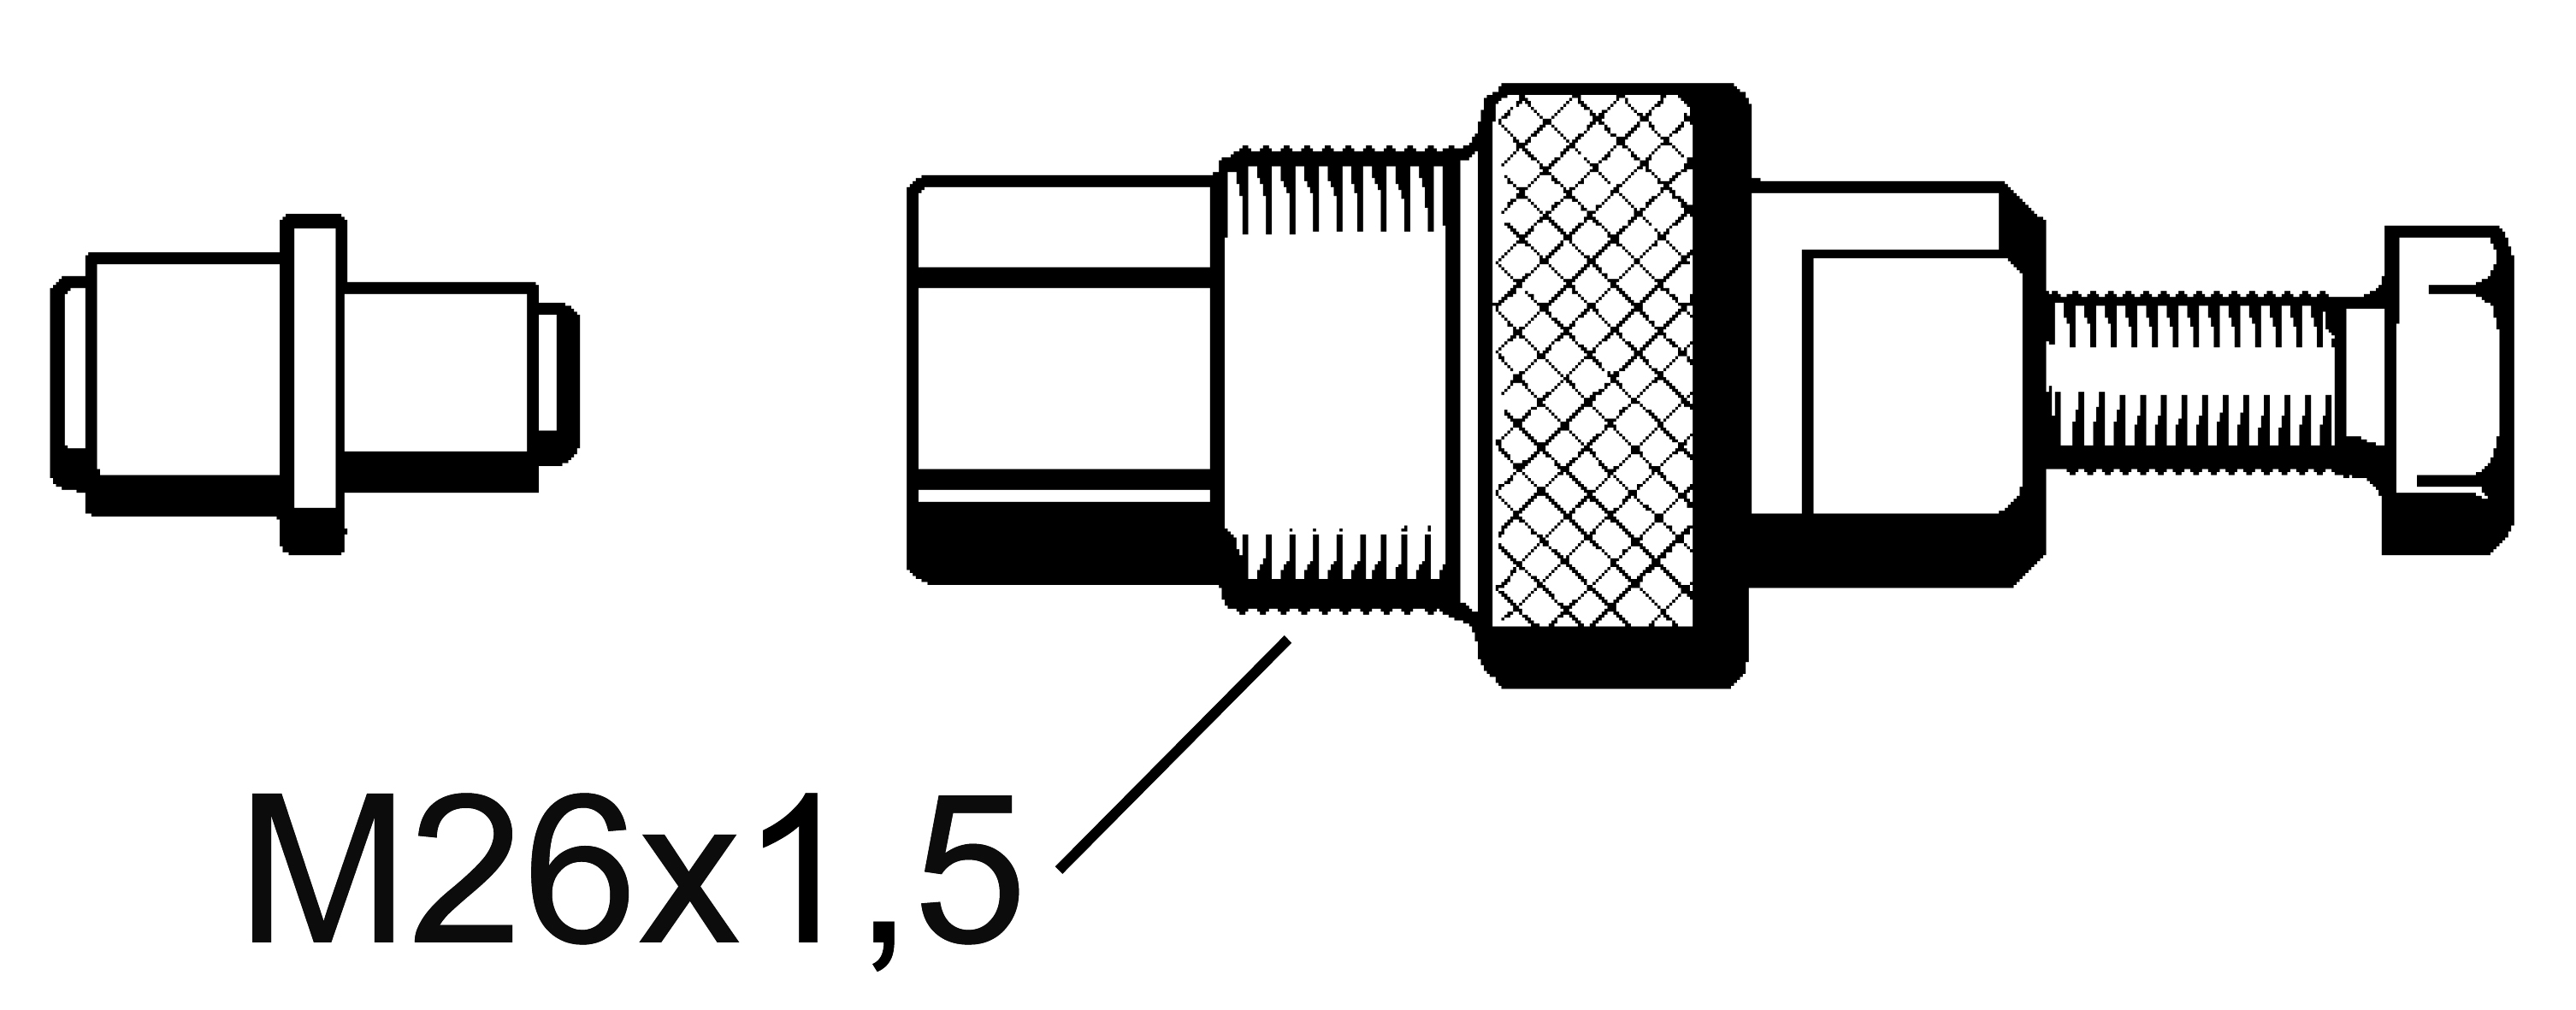 K6097-0000.png